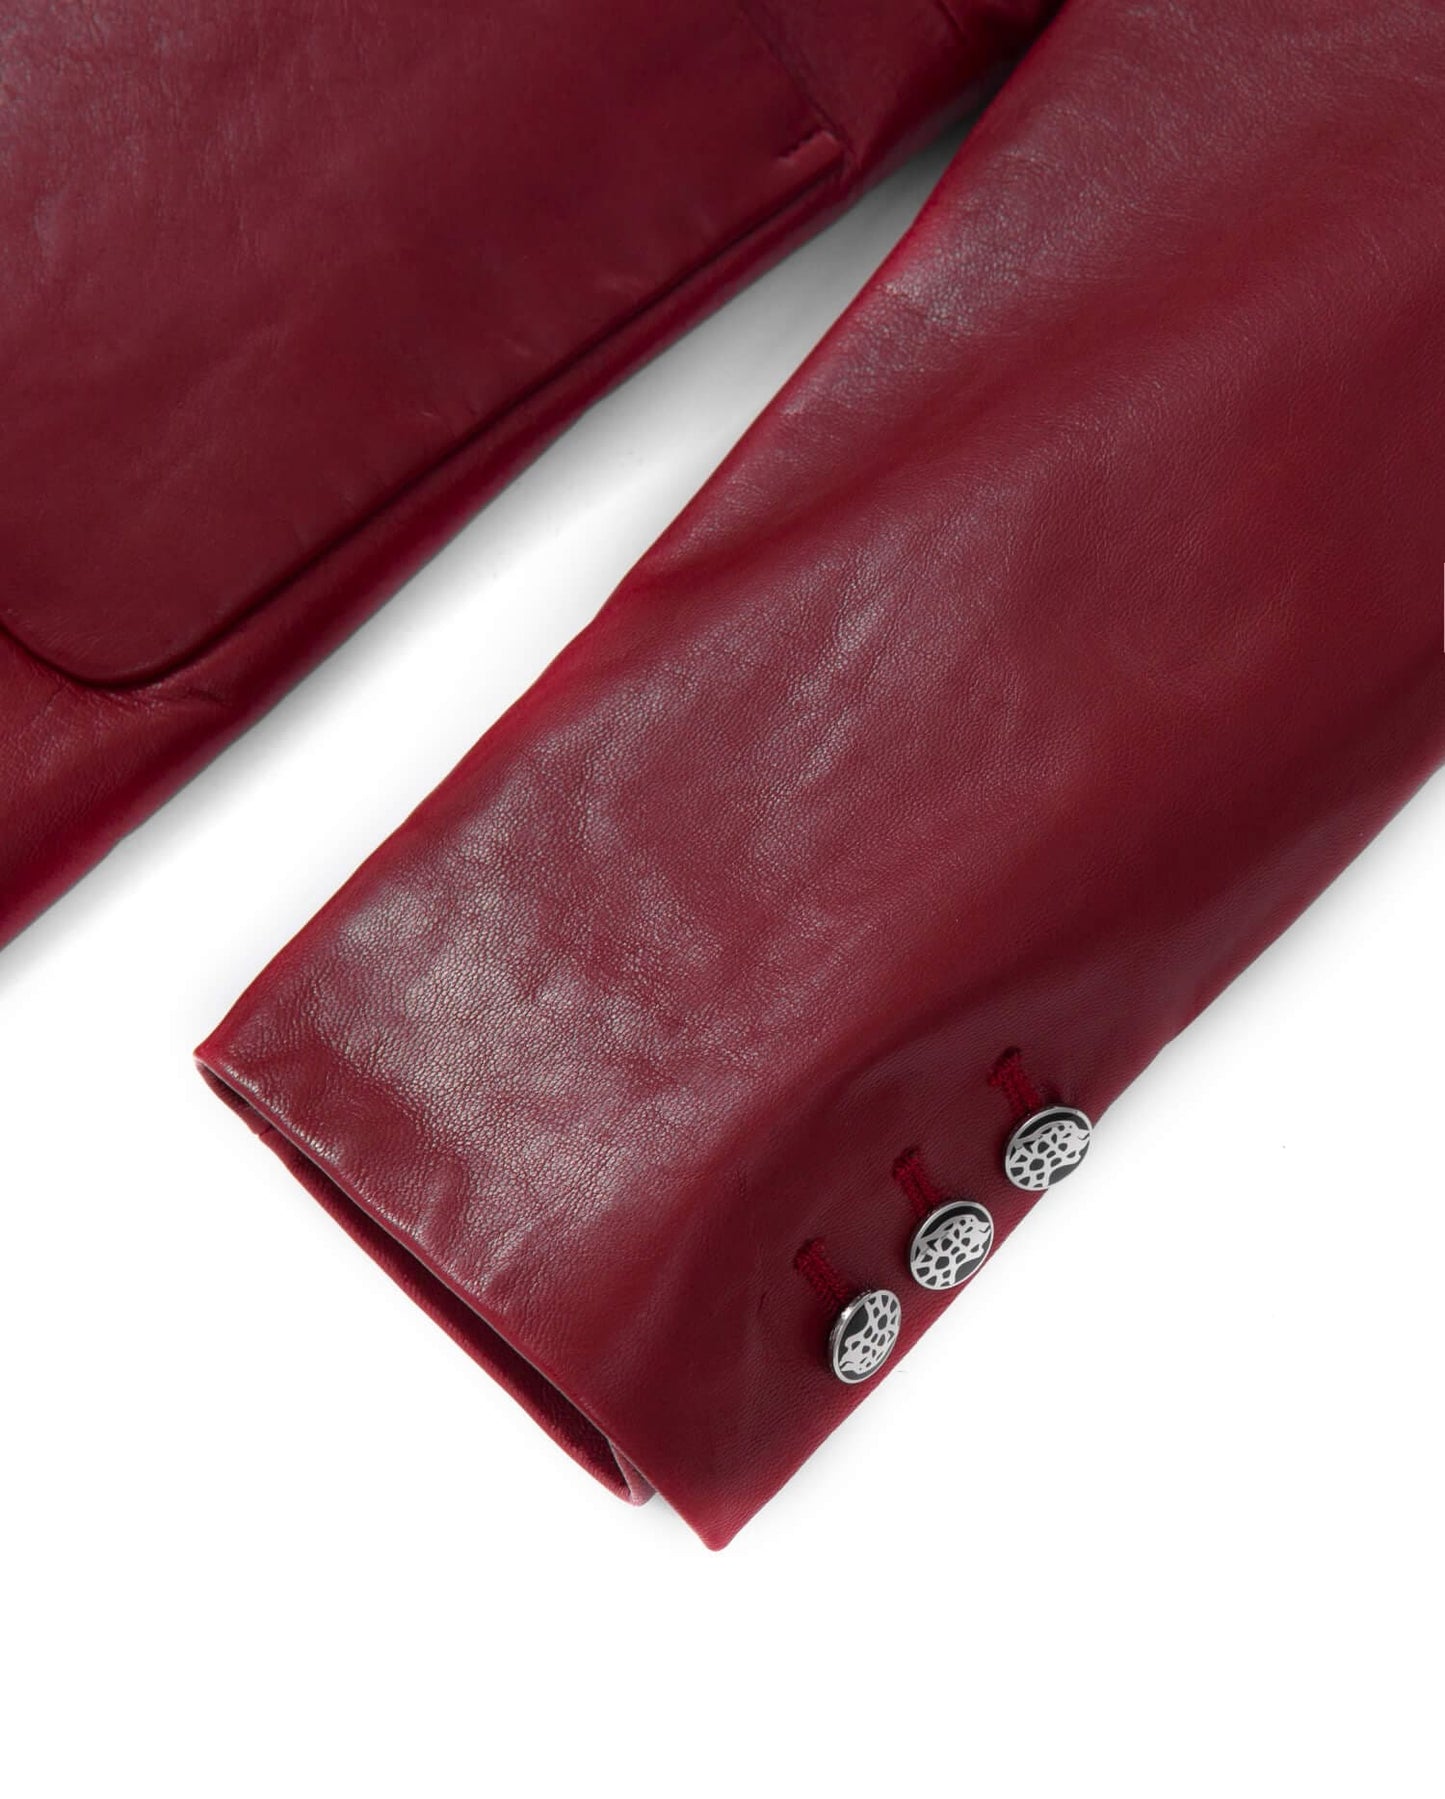 Red Goatskin Patched Leather Blazer Coat